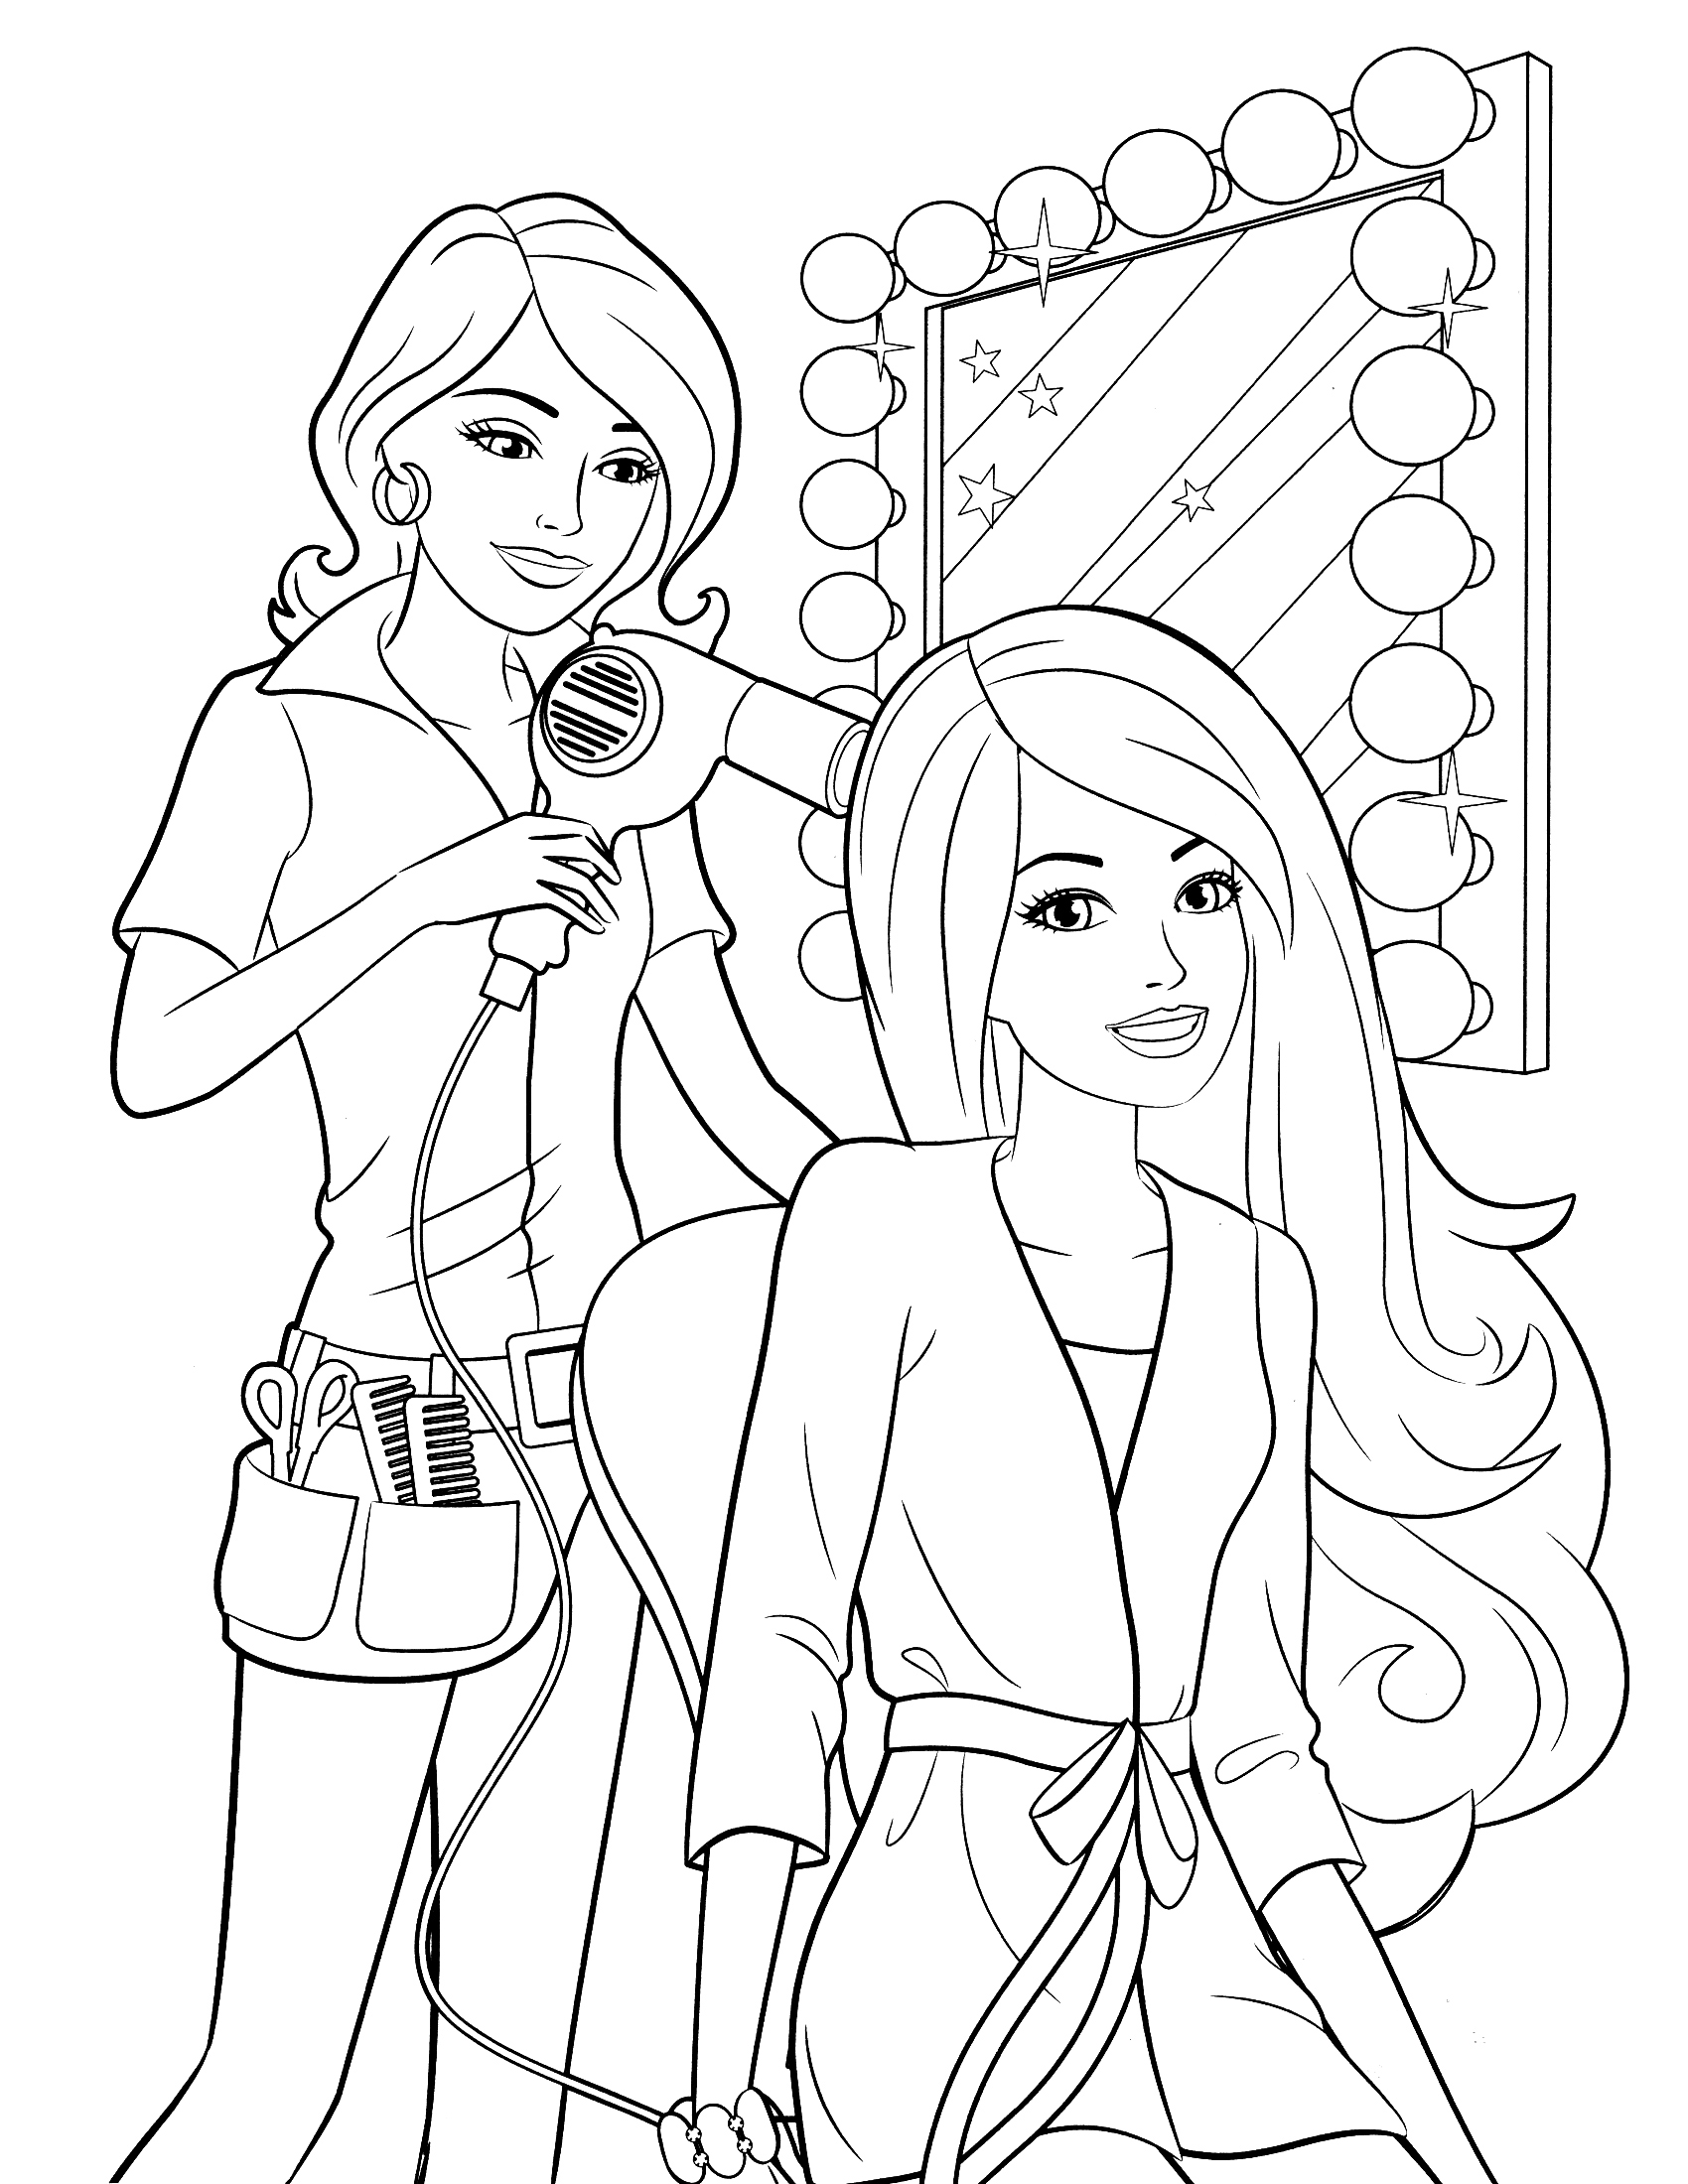 colouring pictures girls coloring pages for girls best coloring pages for kids pictures colouring girls 